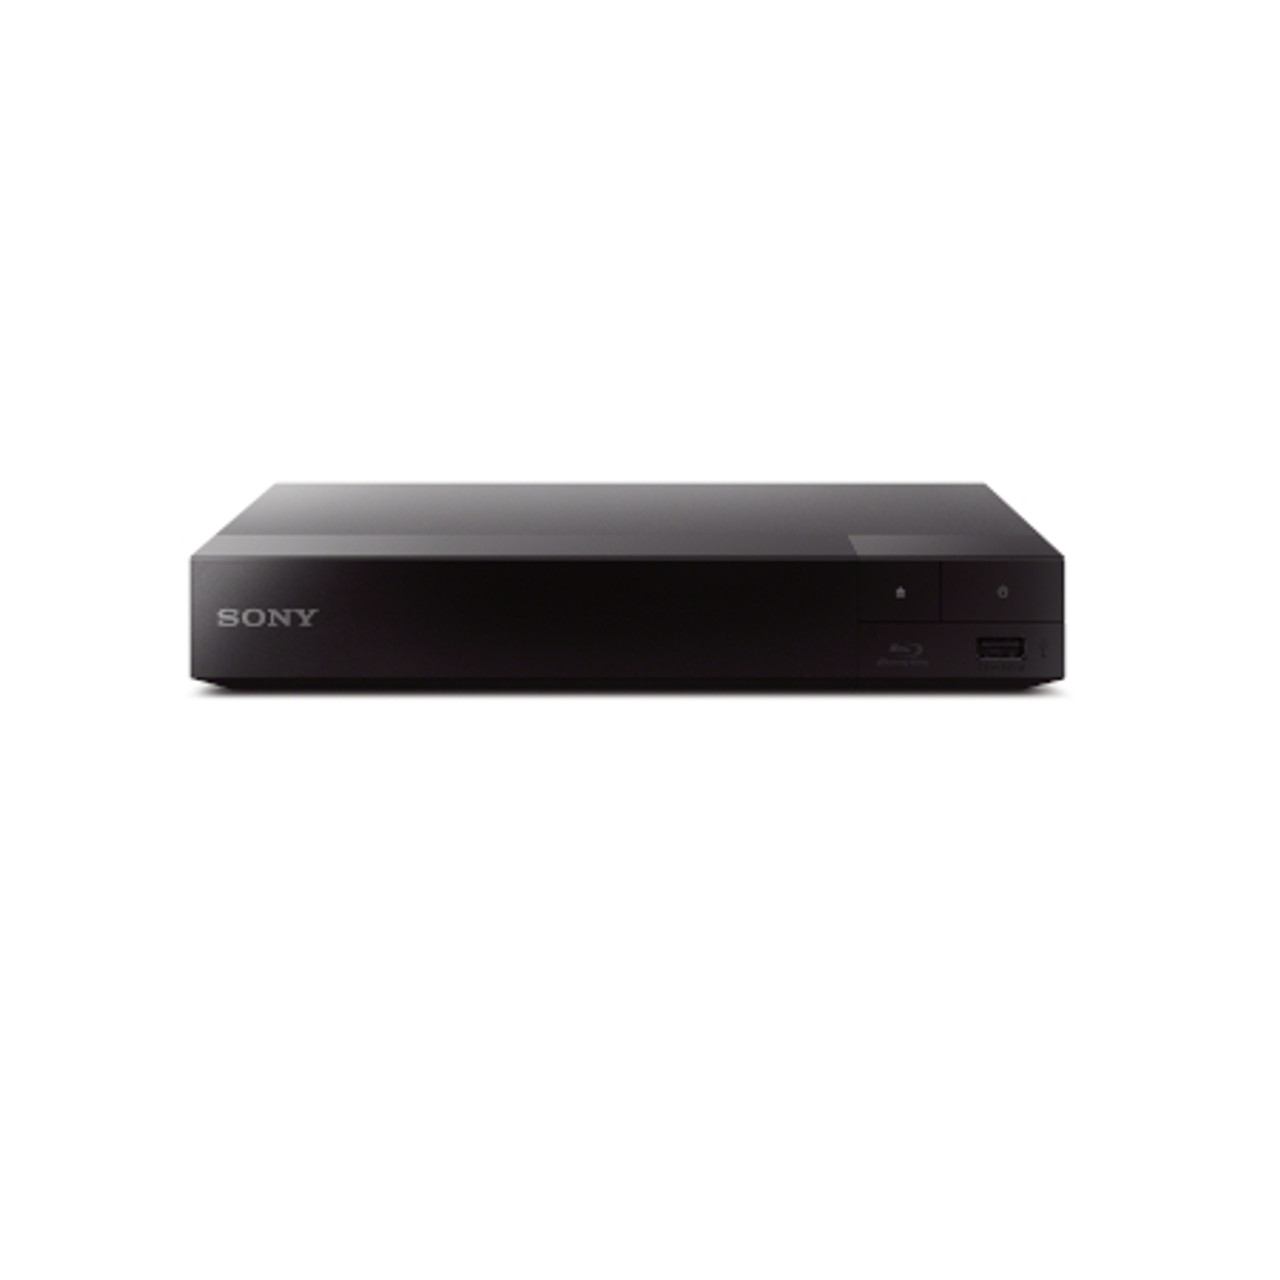 SONY BDPBX370 Streaming Blu-ray Disc player with Wi-Fi